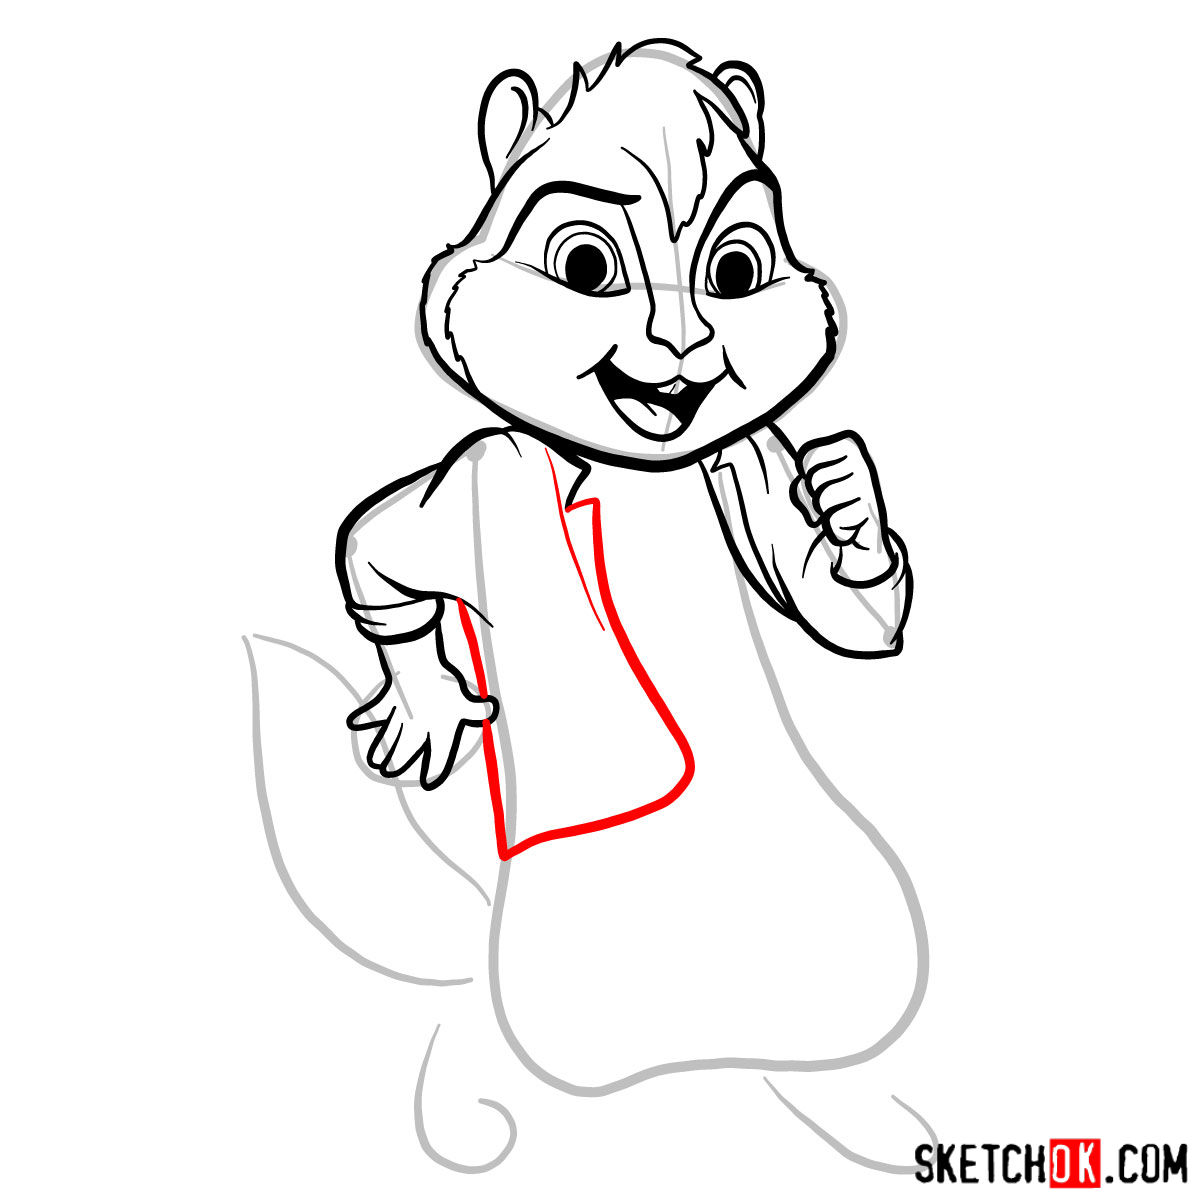 How to draw Alvin from Alvin and the Chipmunks - step 09